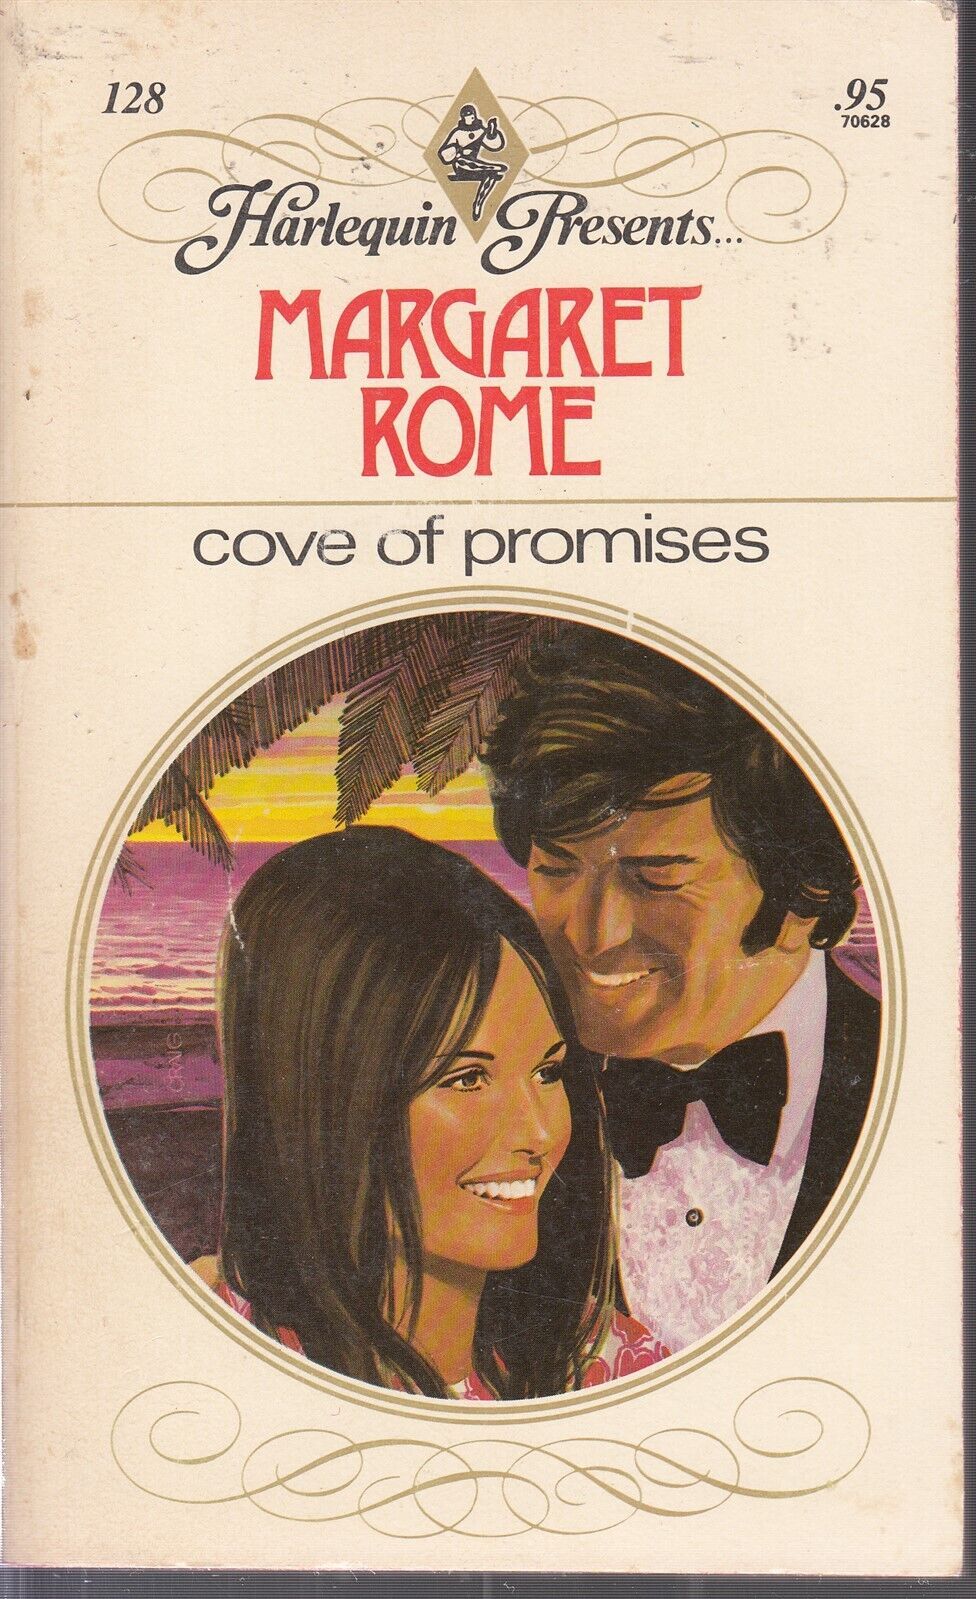 Primary image for Rome, Margaret - Cove Of Promises - Harlequin Presents- # 128